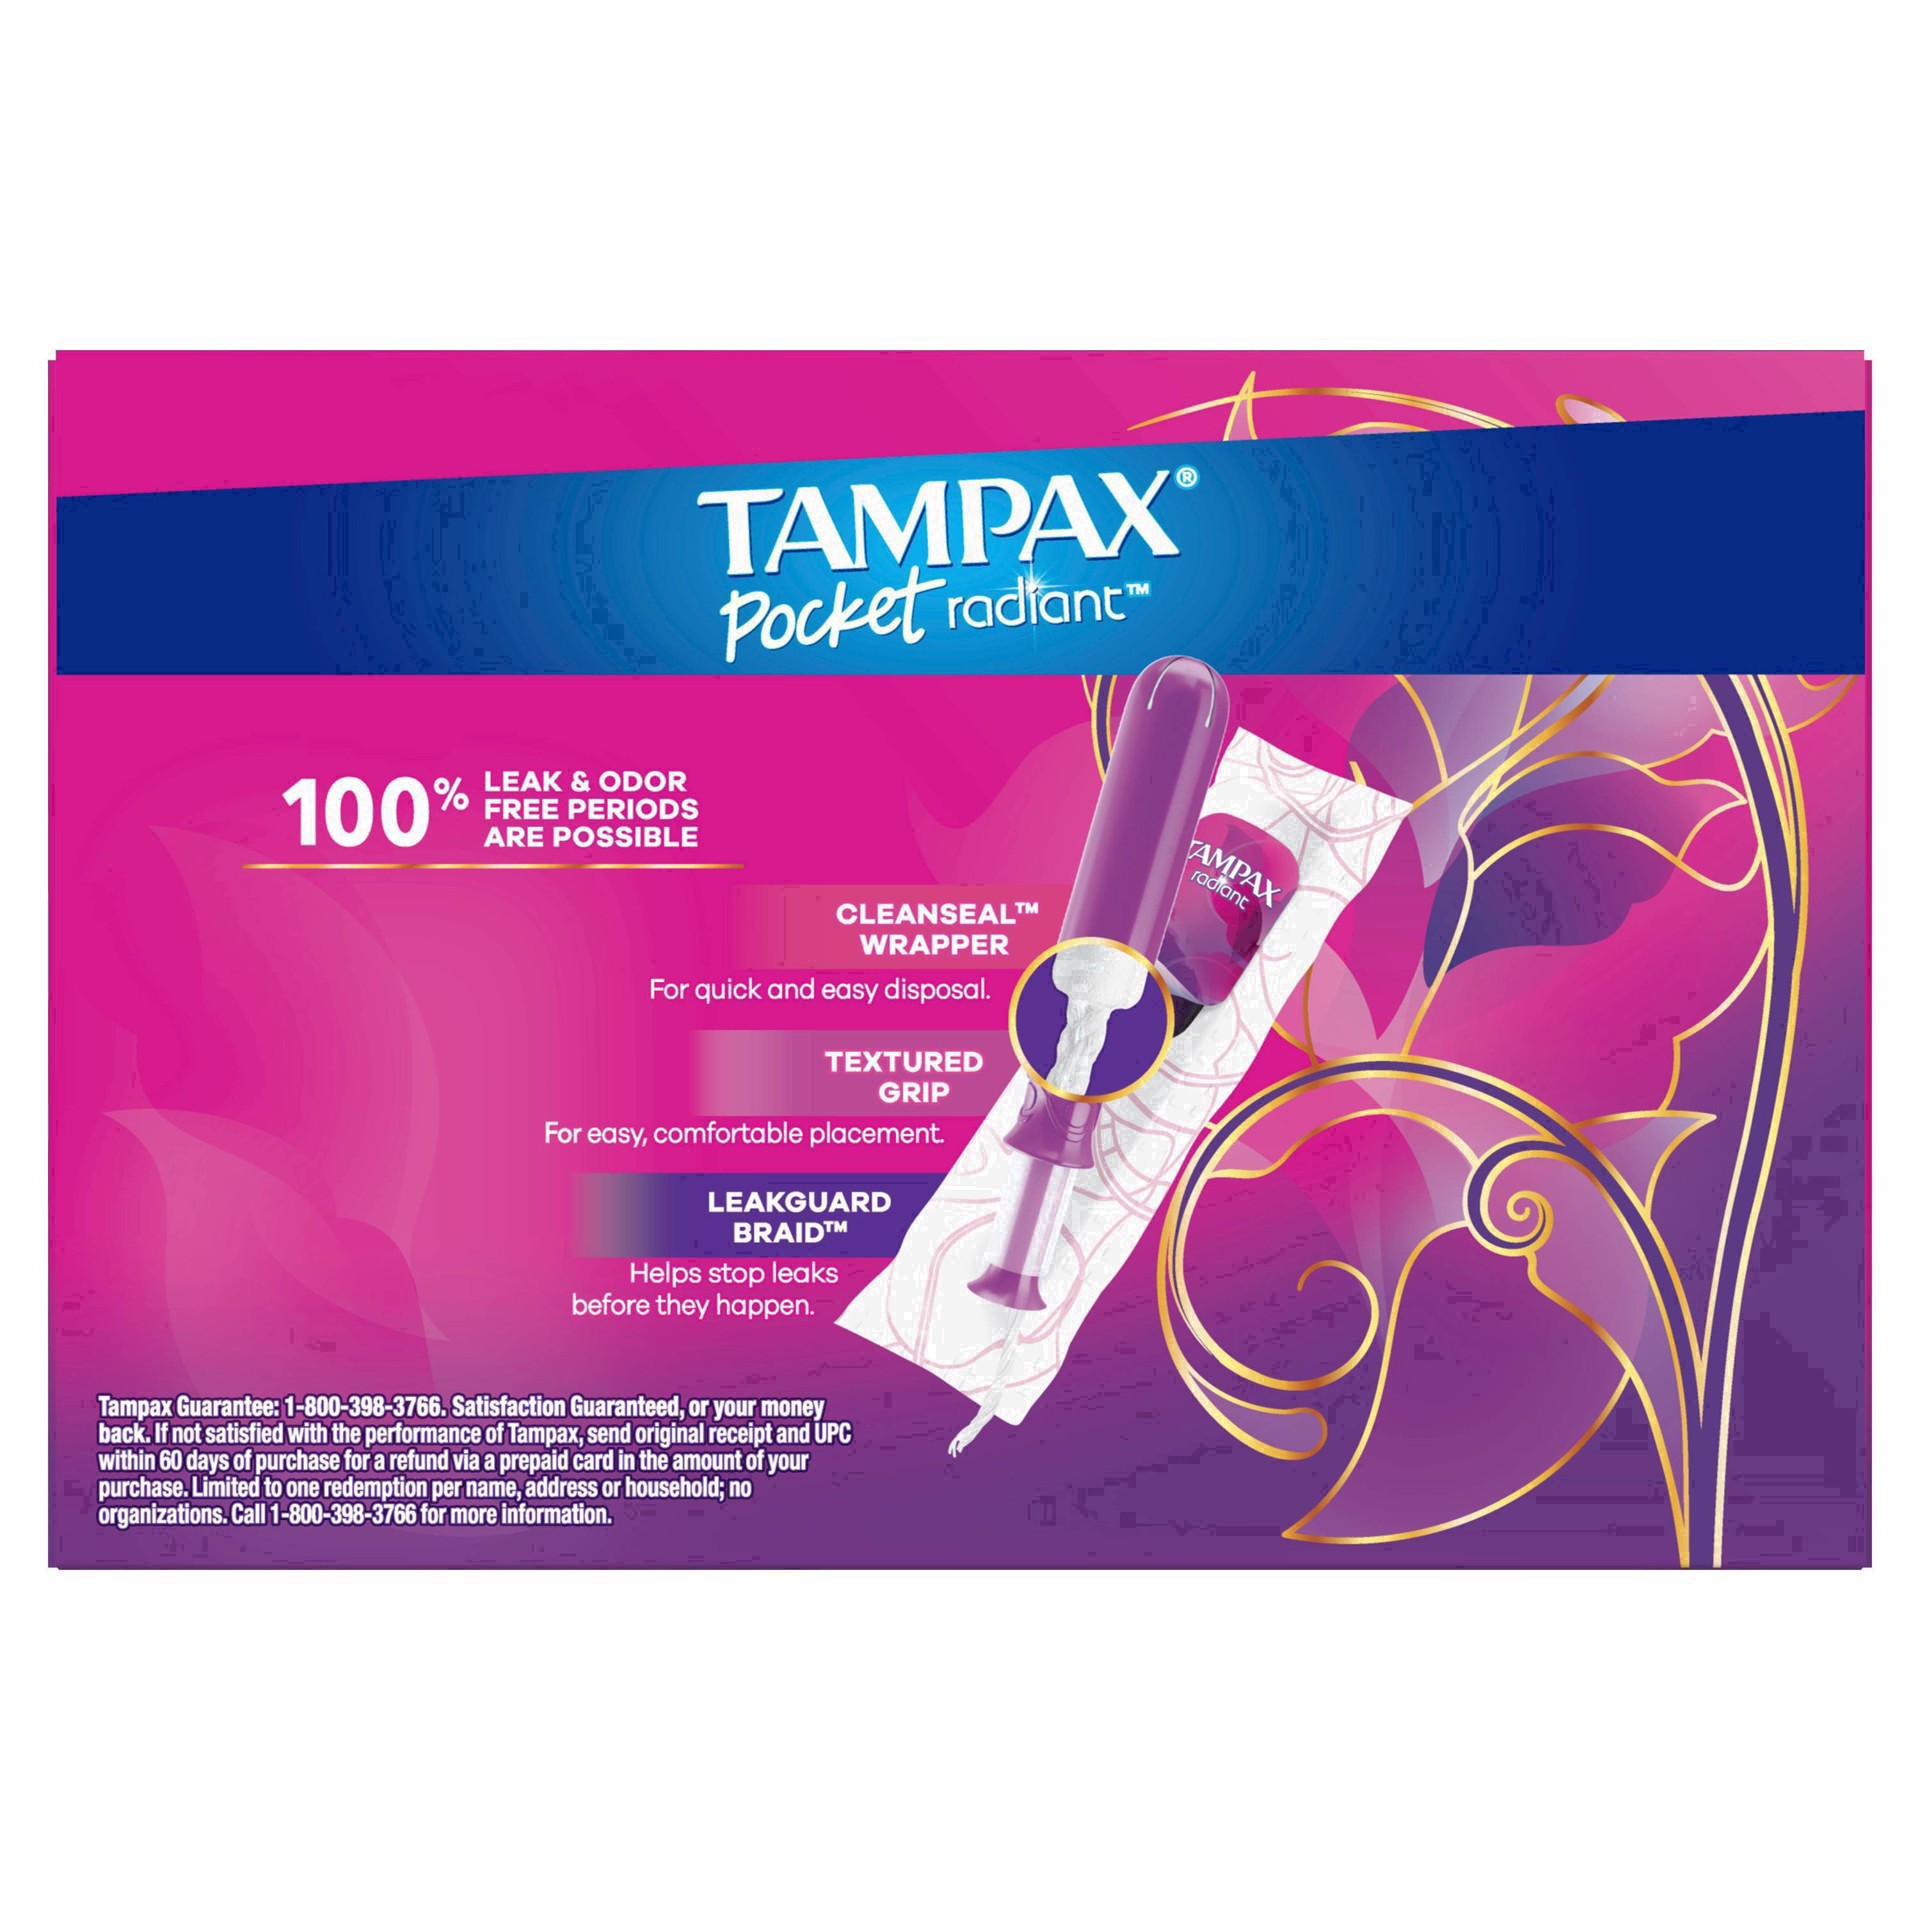 slide 7 of 94, Tampax Pocket Radiant Compact Plastic Tampons, With LeakGuard Braid, Super Absorbency, Unscented, 28 Count, 28 ct